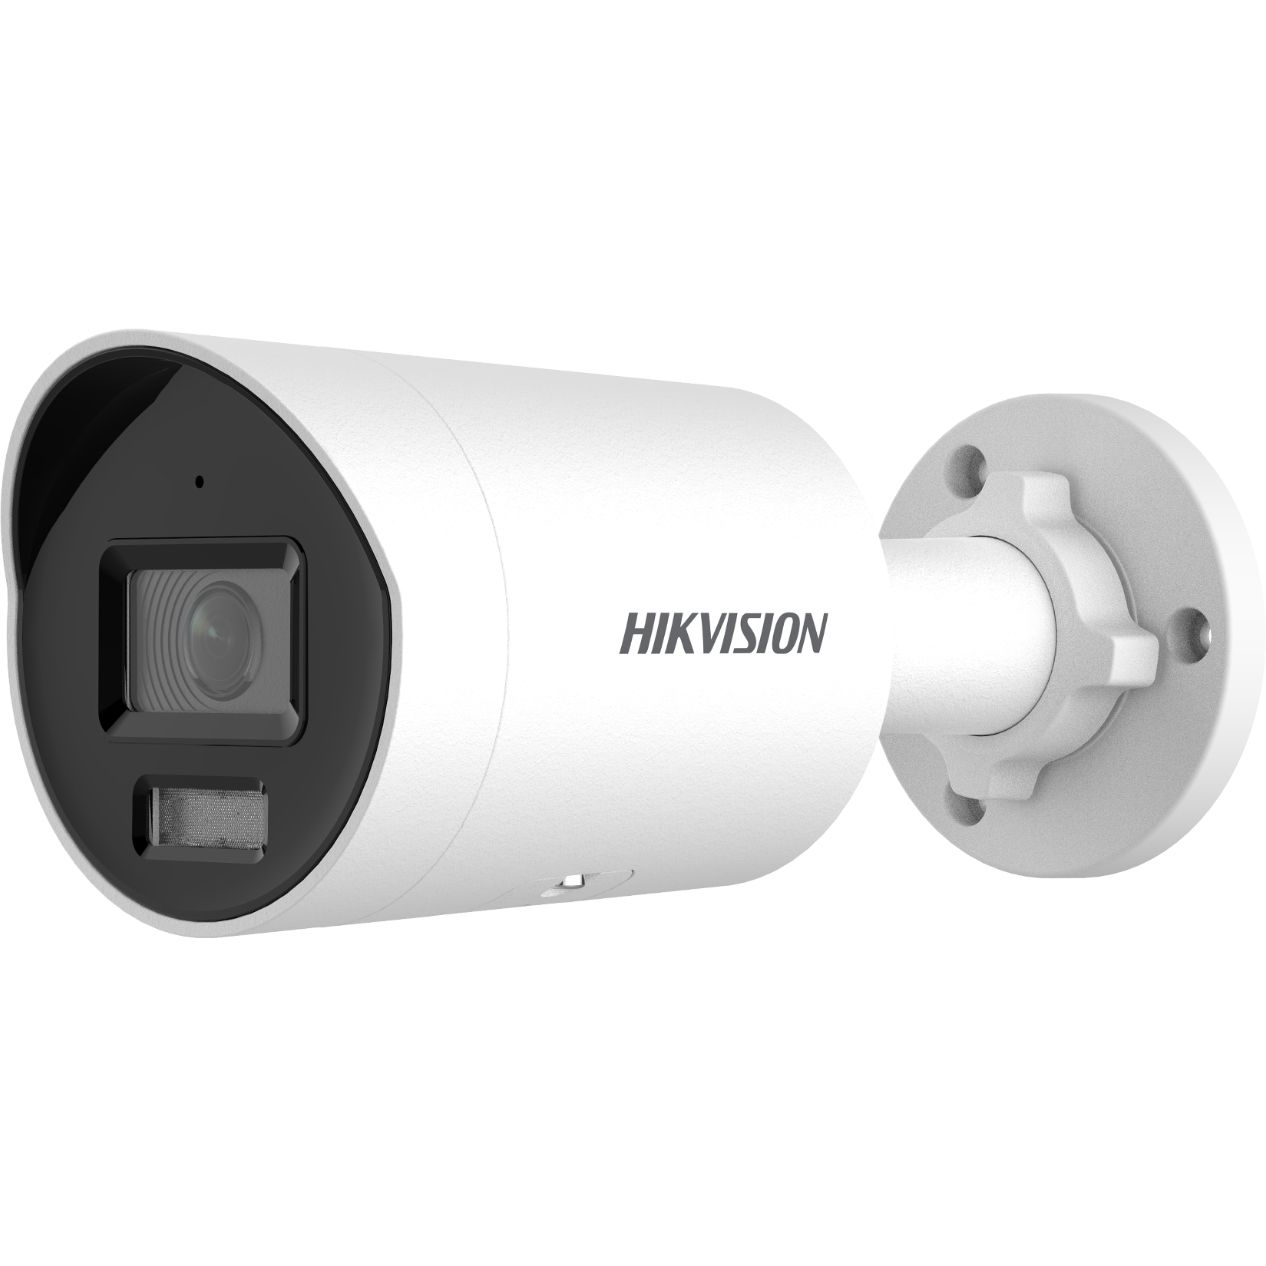 IP-камера Hikvision DS-2CD2023G2-IU(2.8mm) white (УТ-00042017) камера hikvision